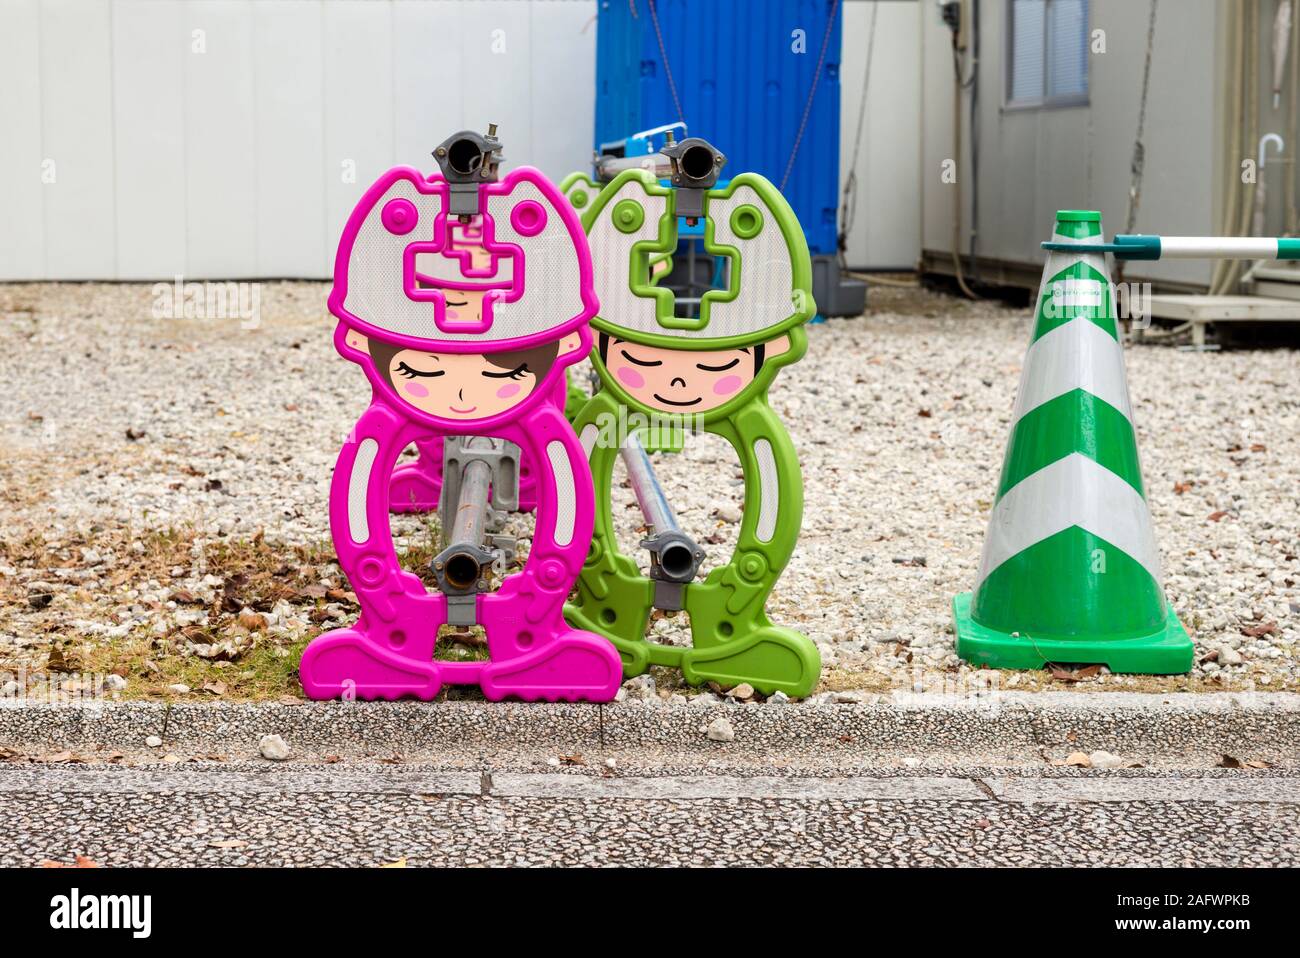 Construction site roadblock with anime characters, Japan Stock Photo